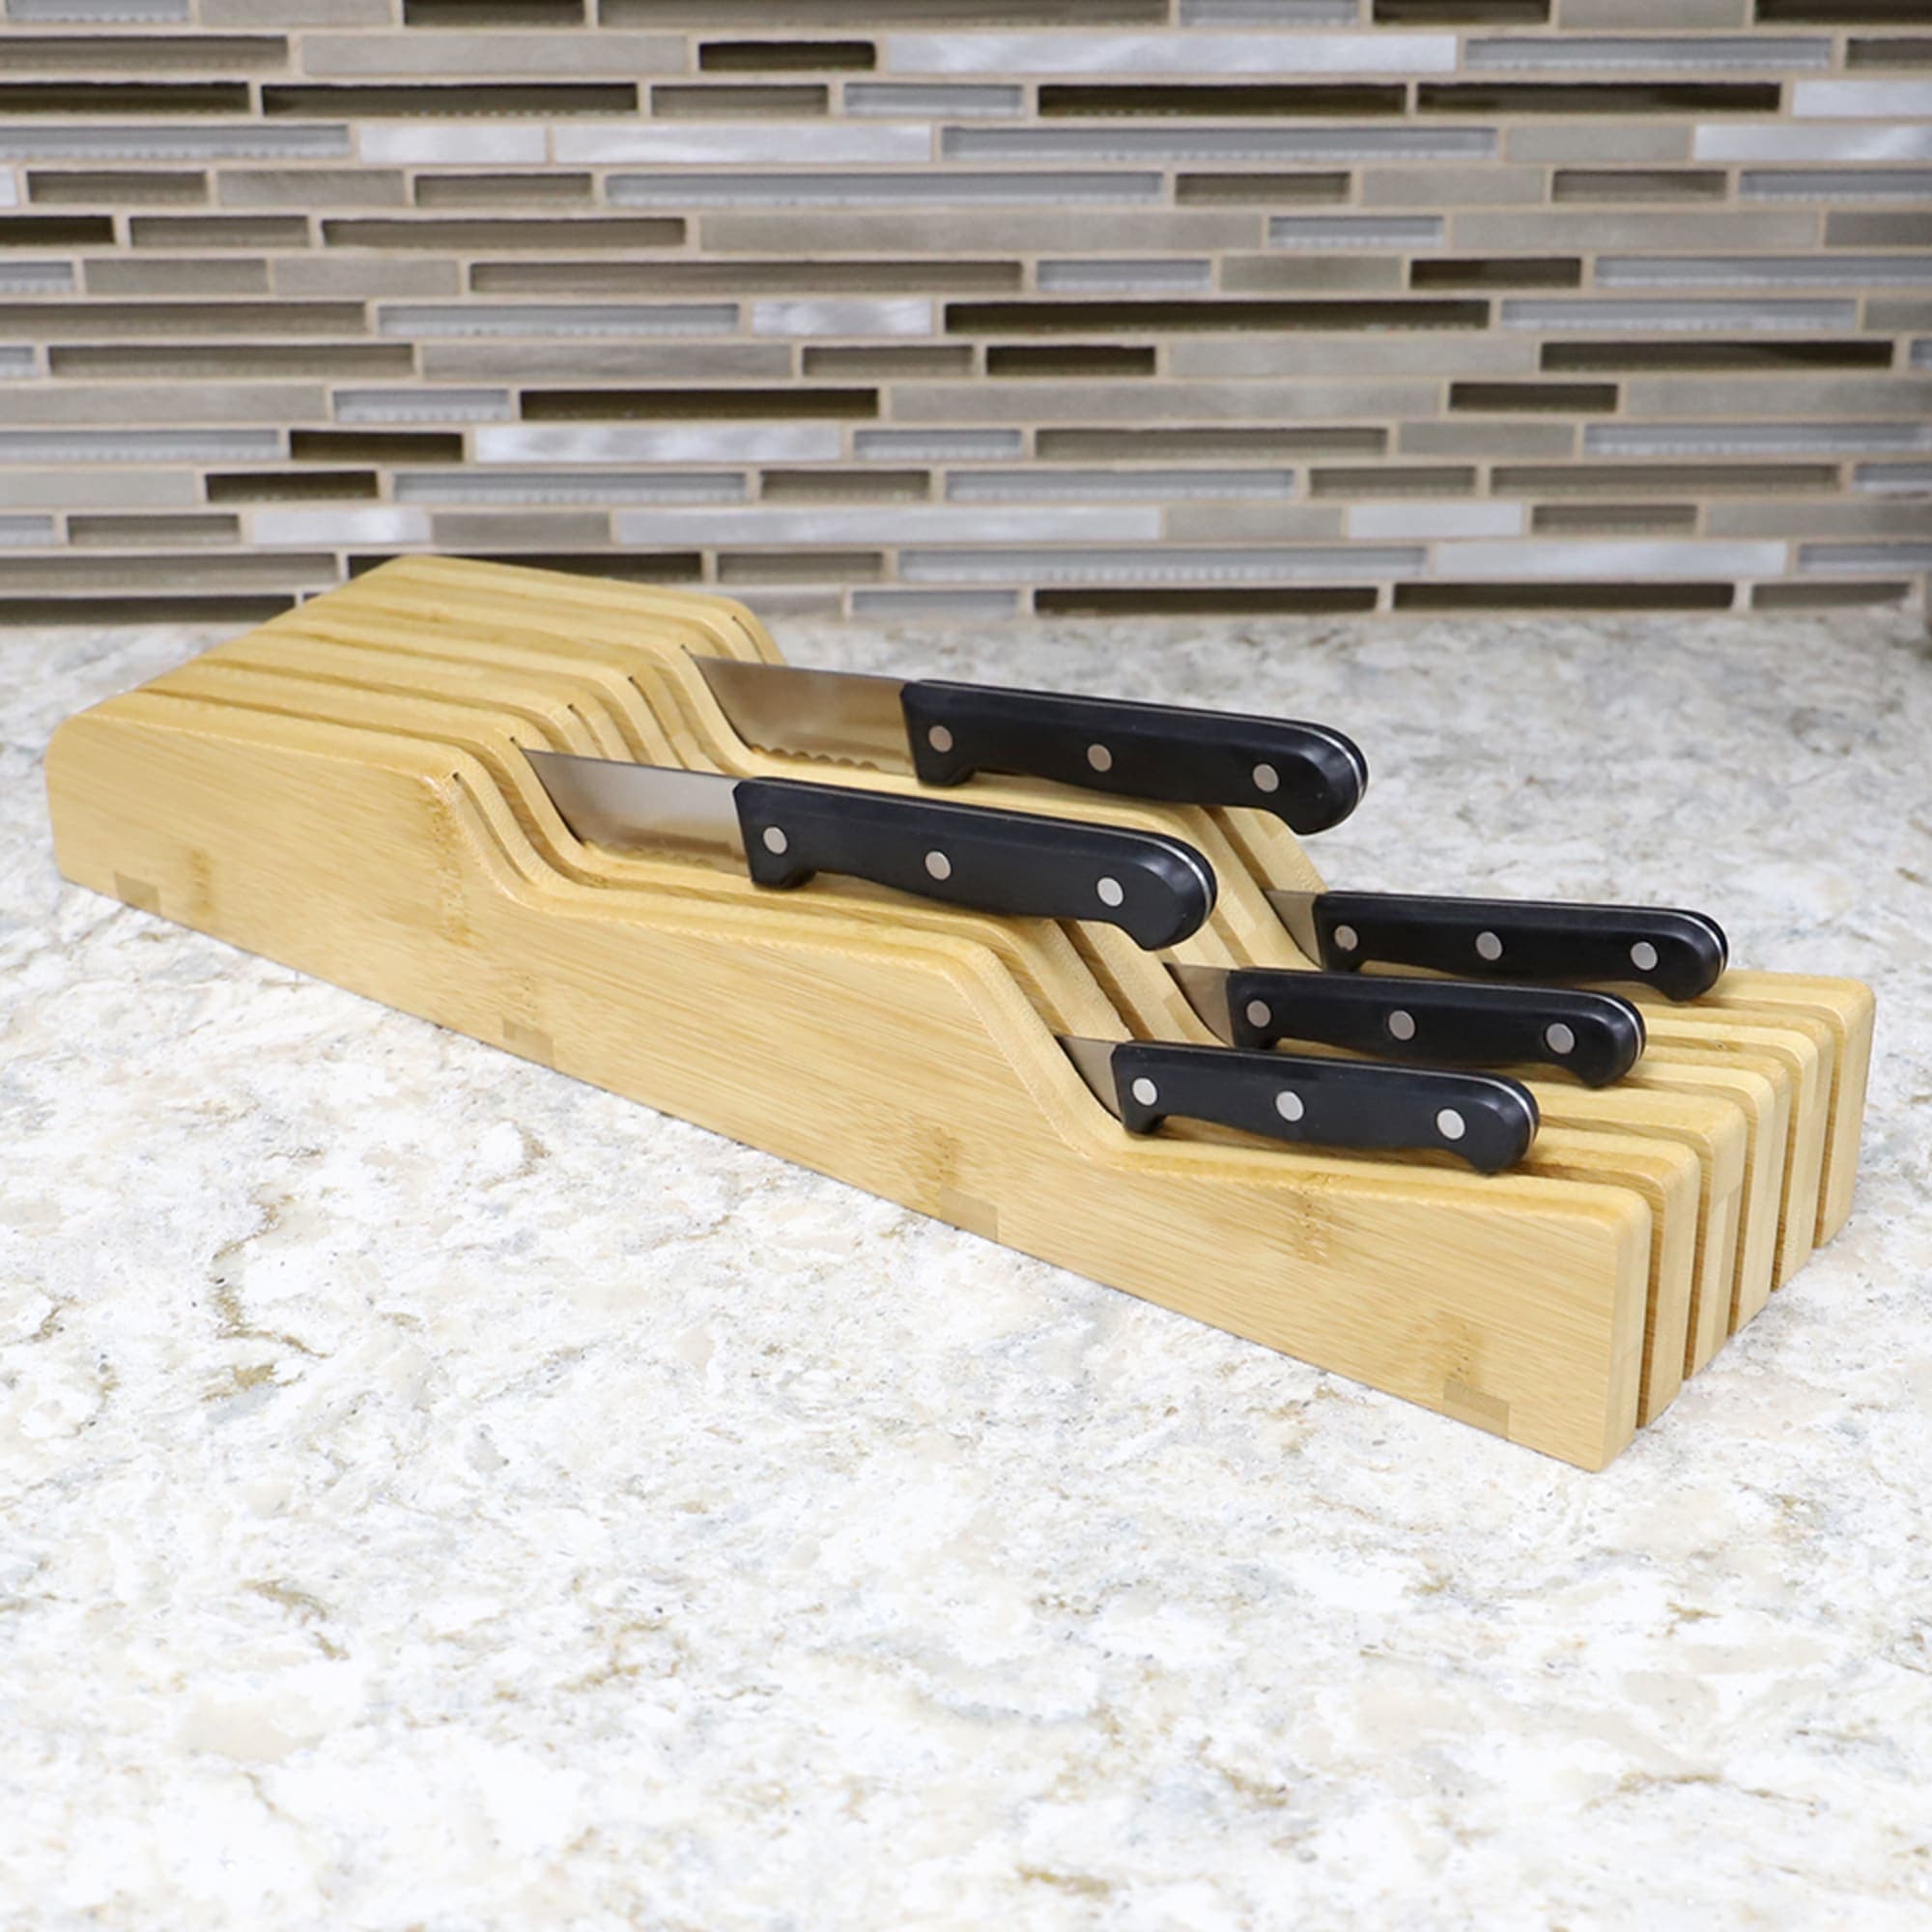 Home Basics Contemporary Wave Horizontal In Drawer Bamboo Knife Block, Natural $15.00 EACH, CASE PACK OF 6